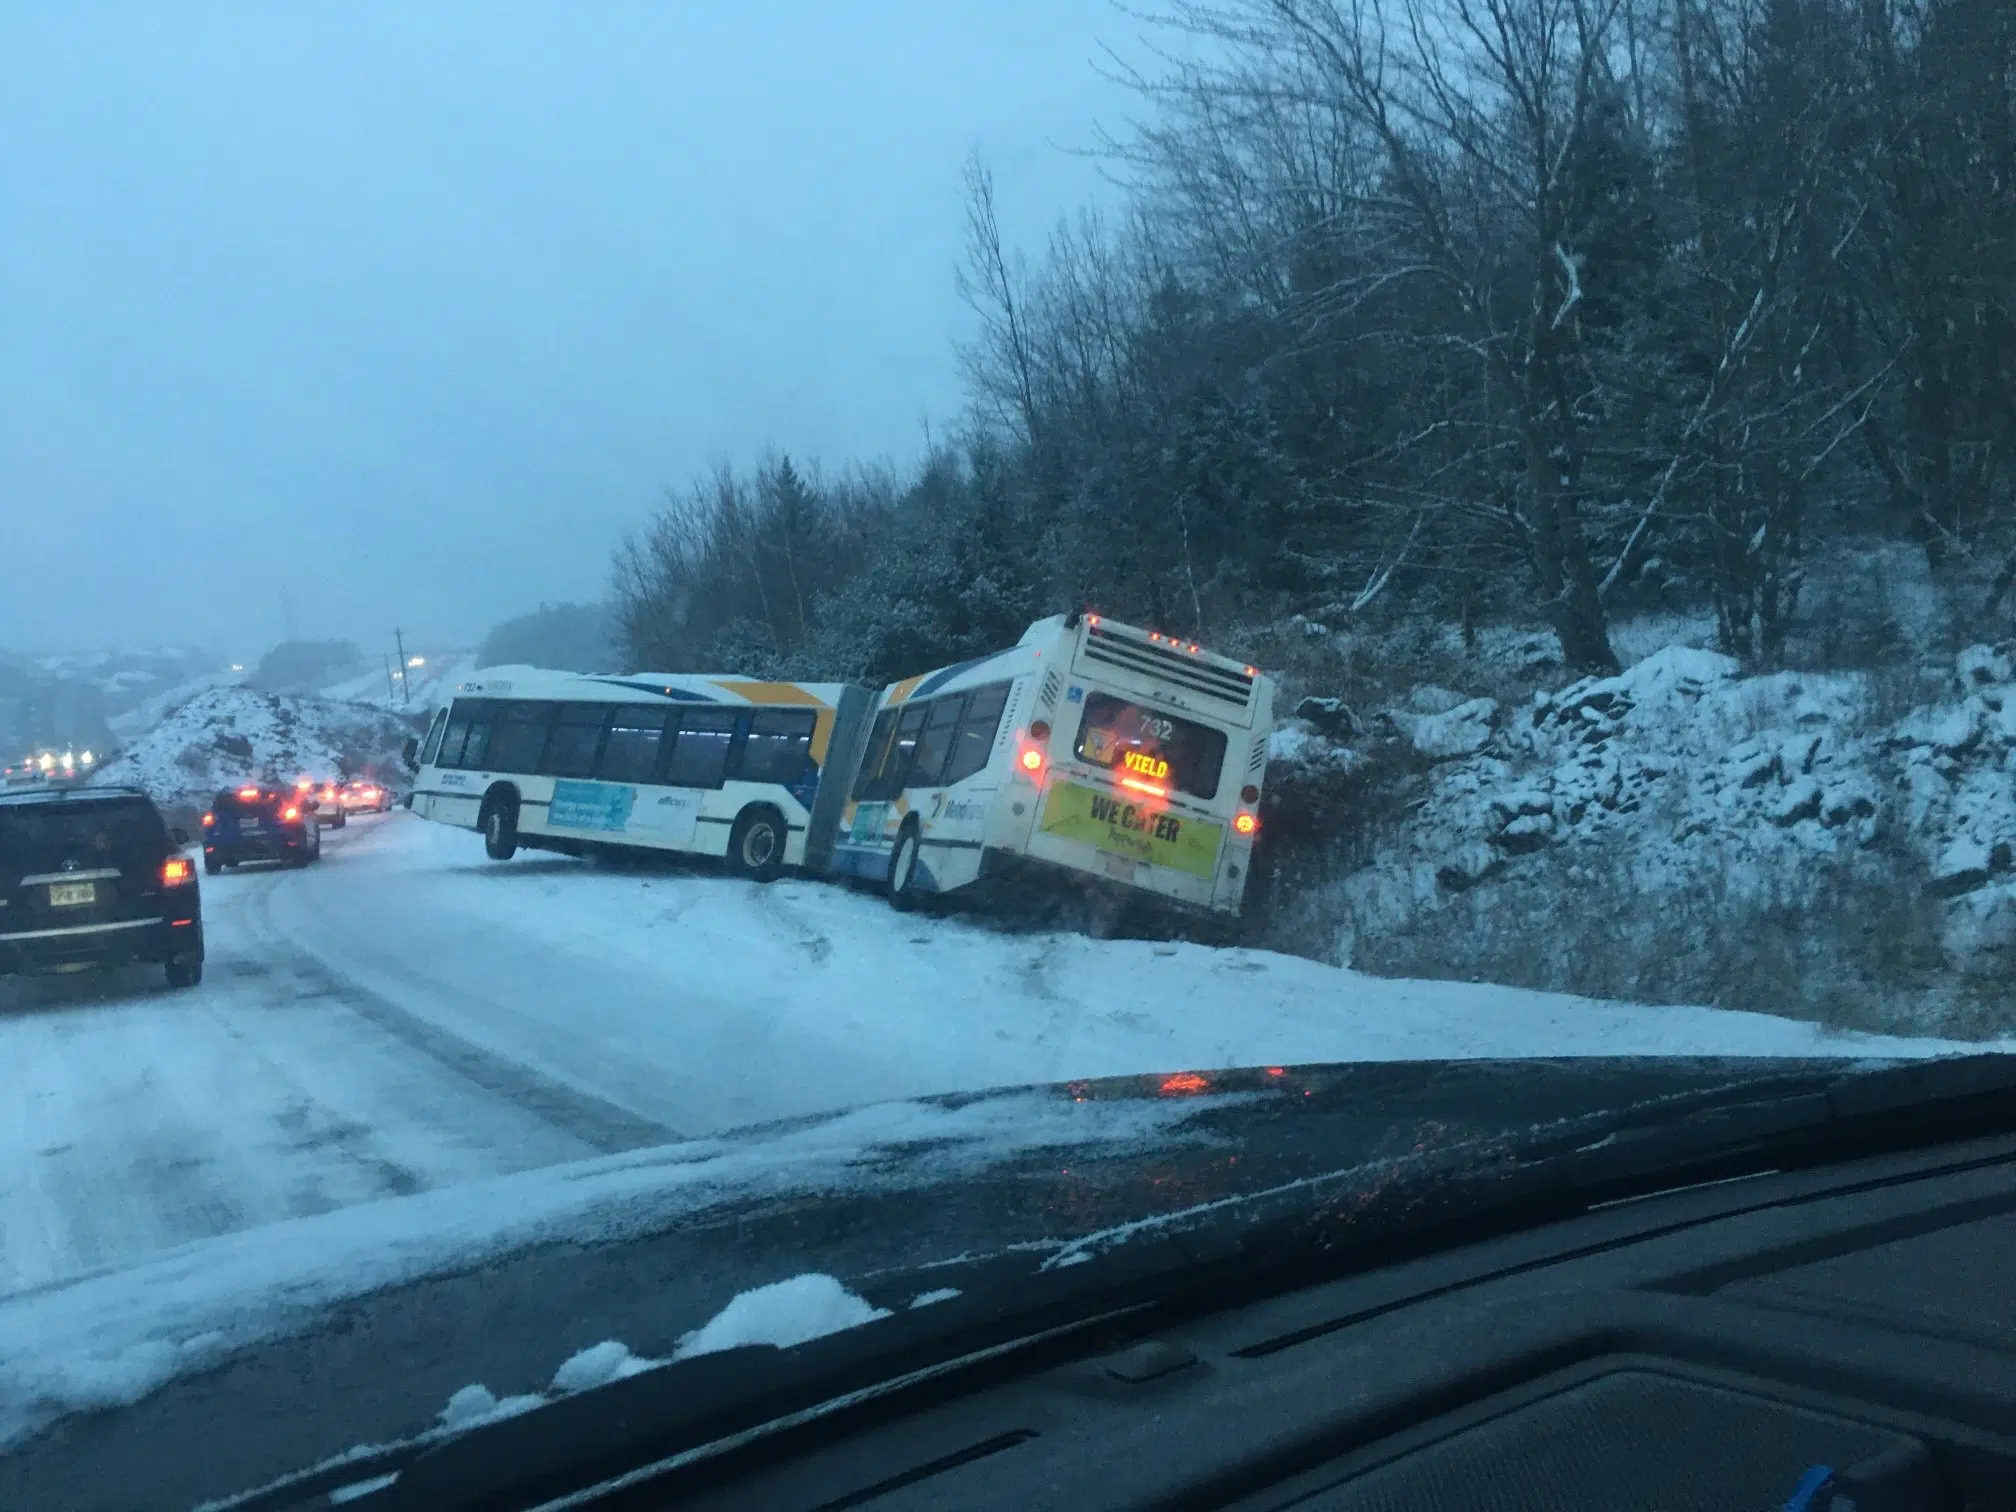 Snowfall leading to slick roads in Halifax, many buses on snow plan